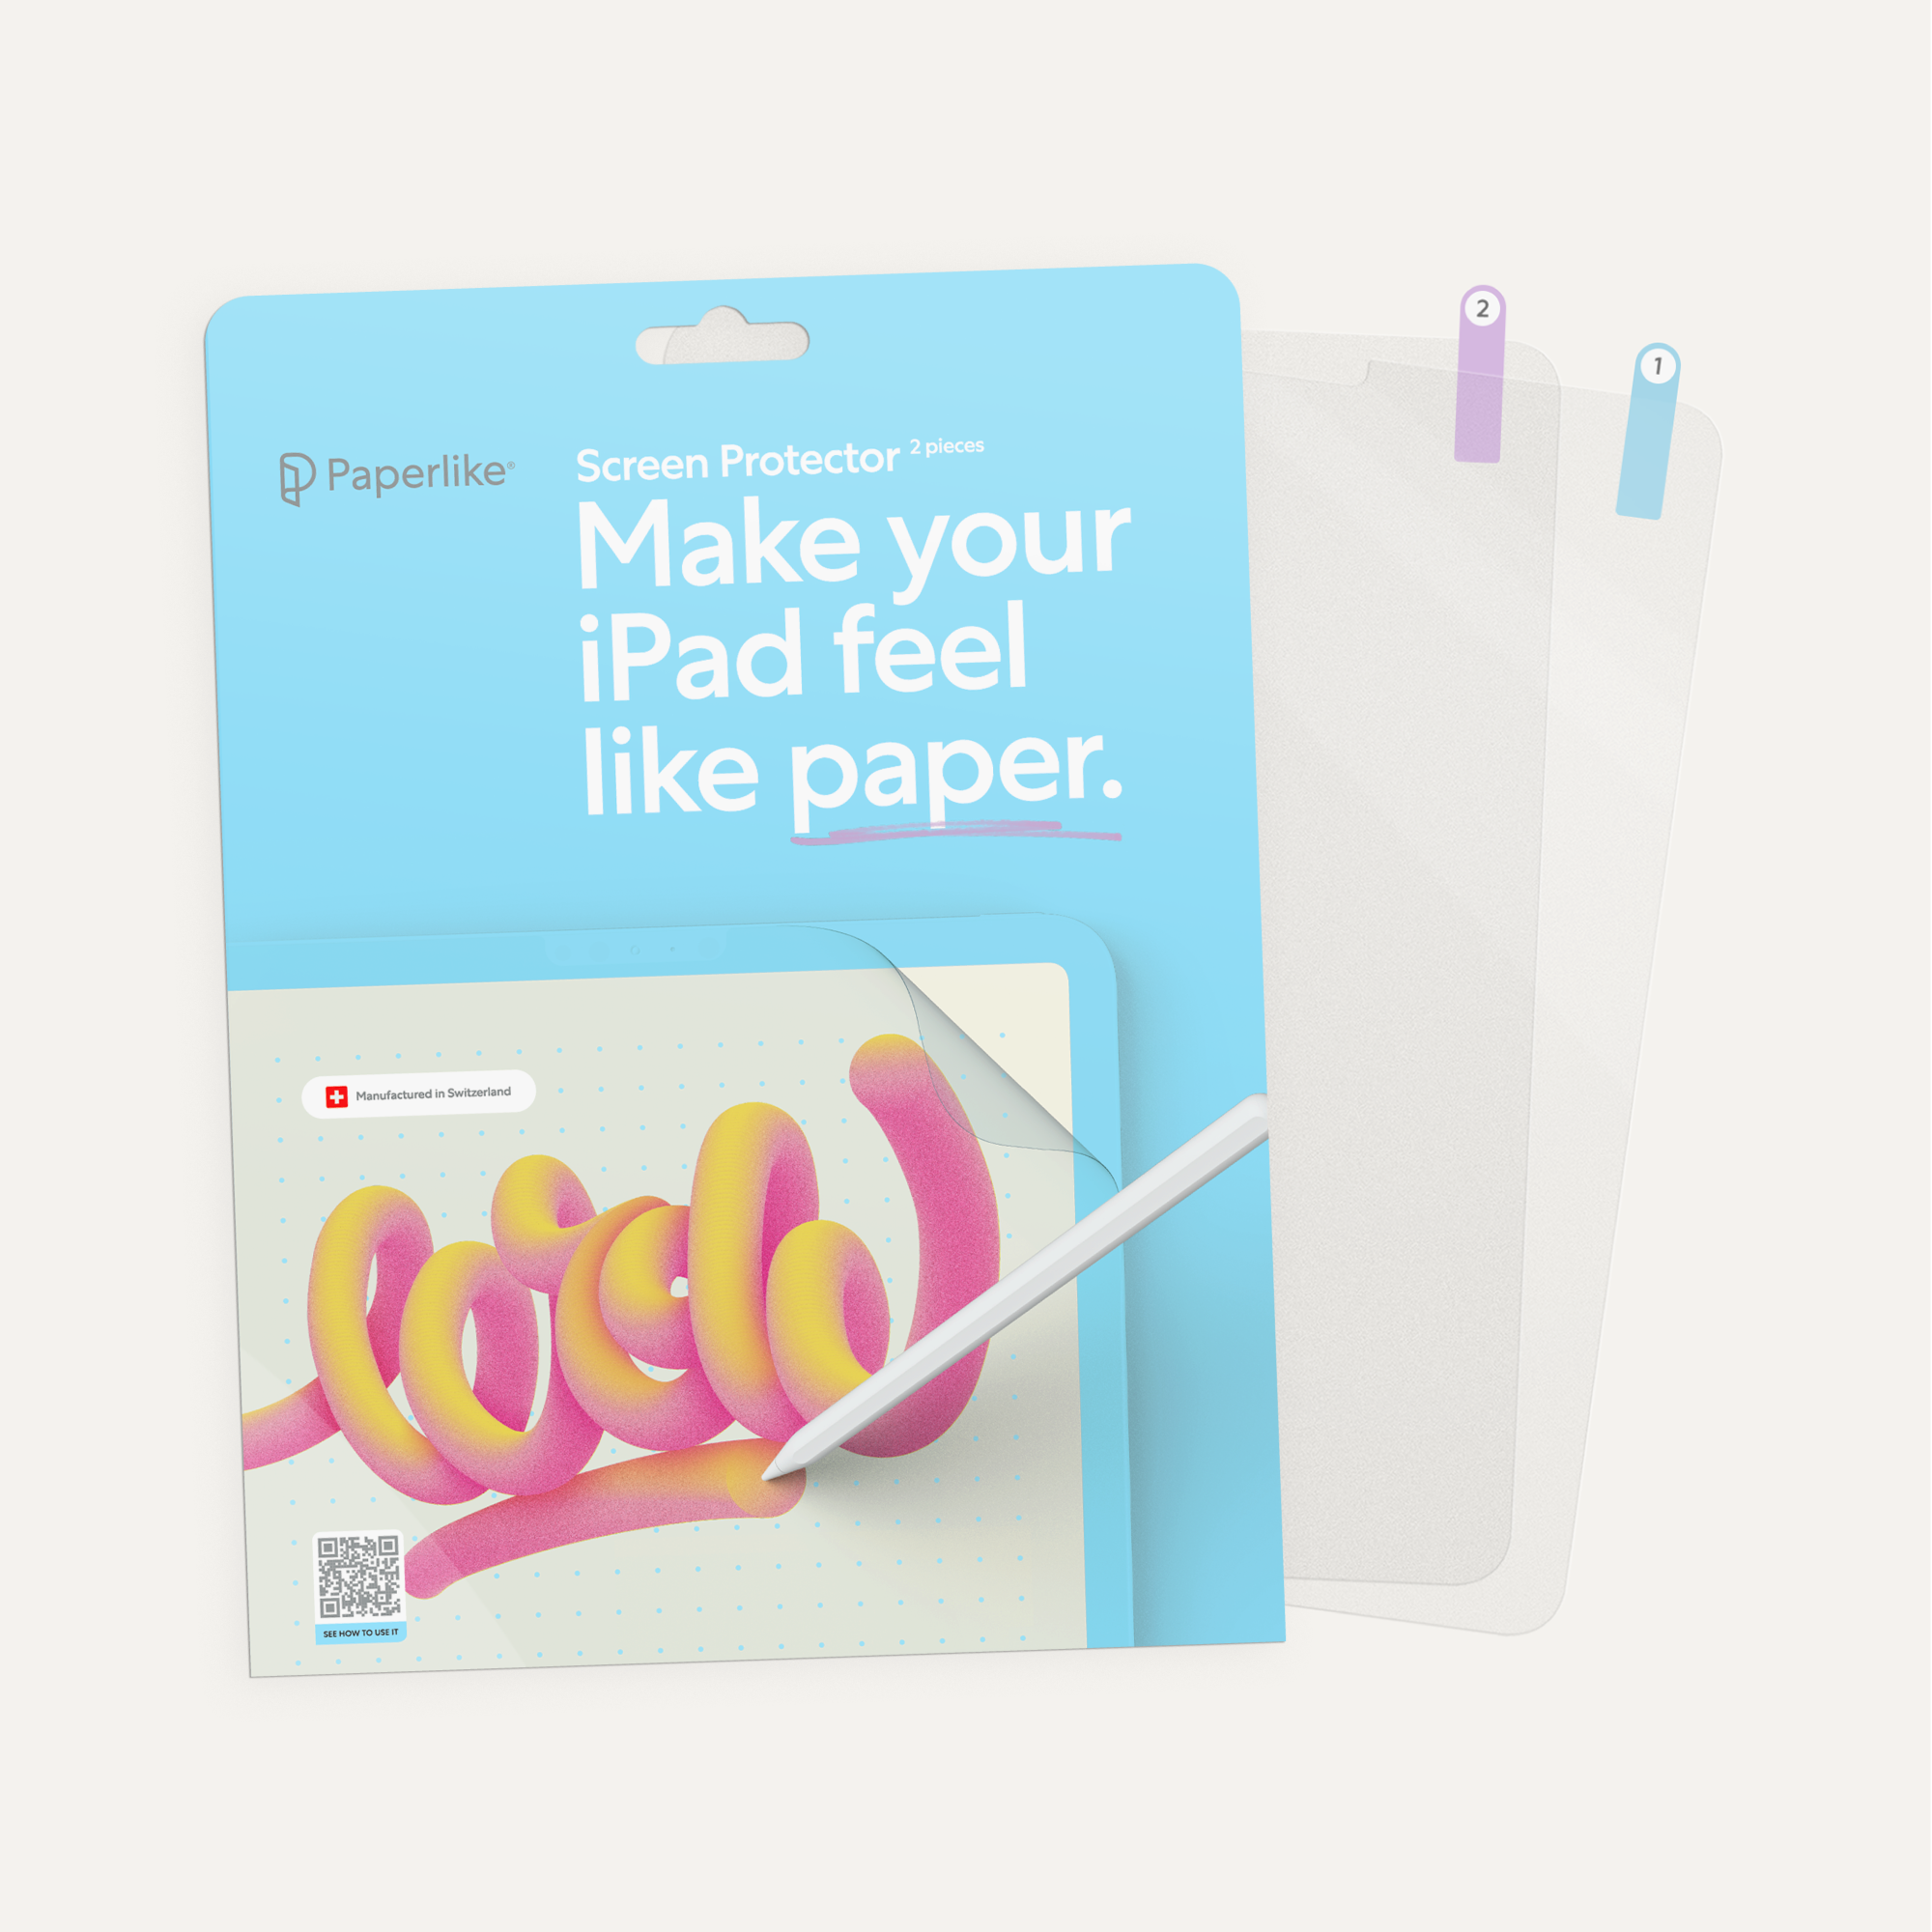 Paperlike Screen Protector for Apple iPad - 2 units per pack